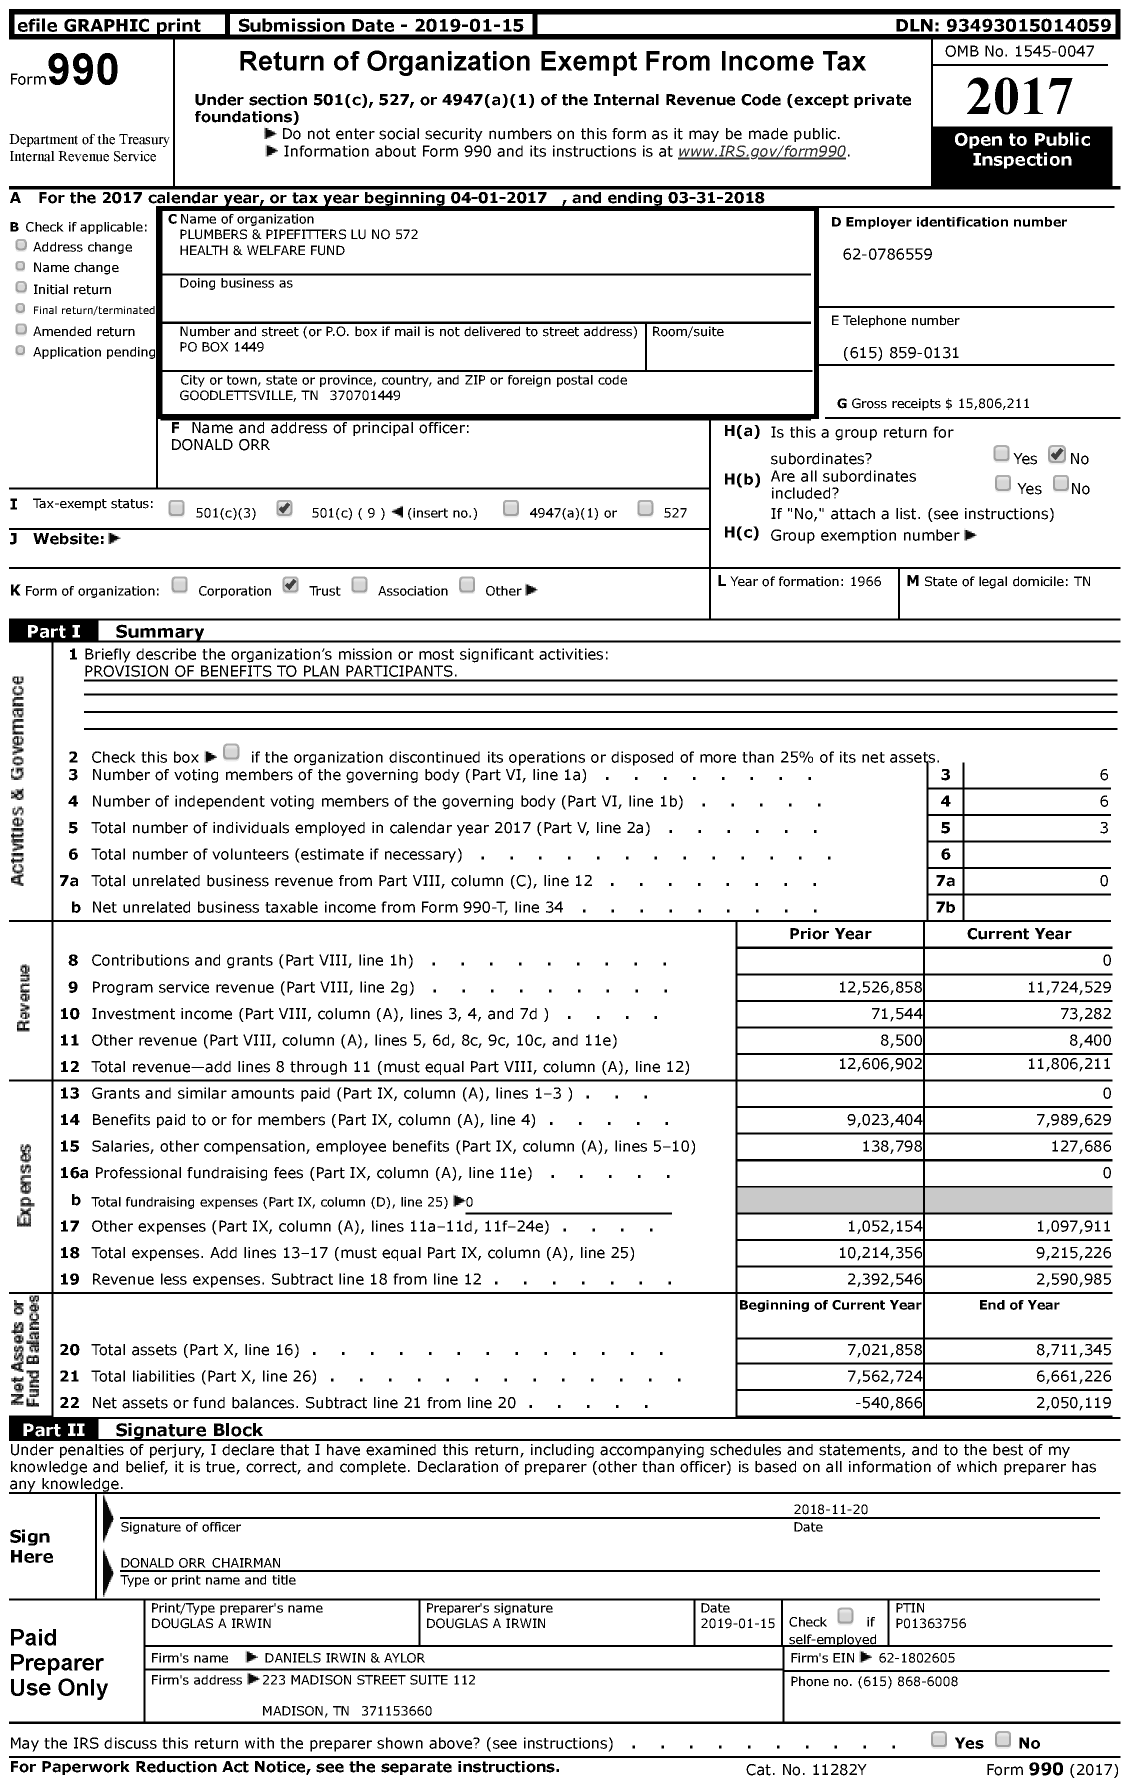 Image of first page of 2017 Form 990 for Plumbers & Pipefitters LU 572 Health & Welfare Fund